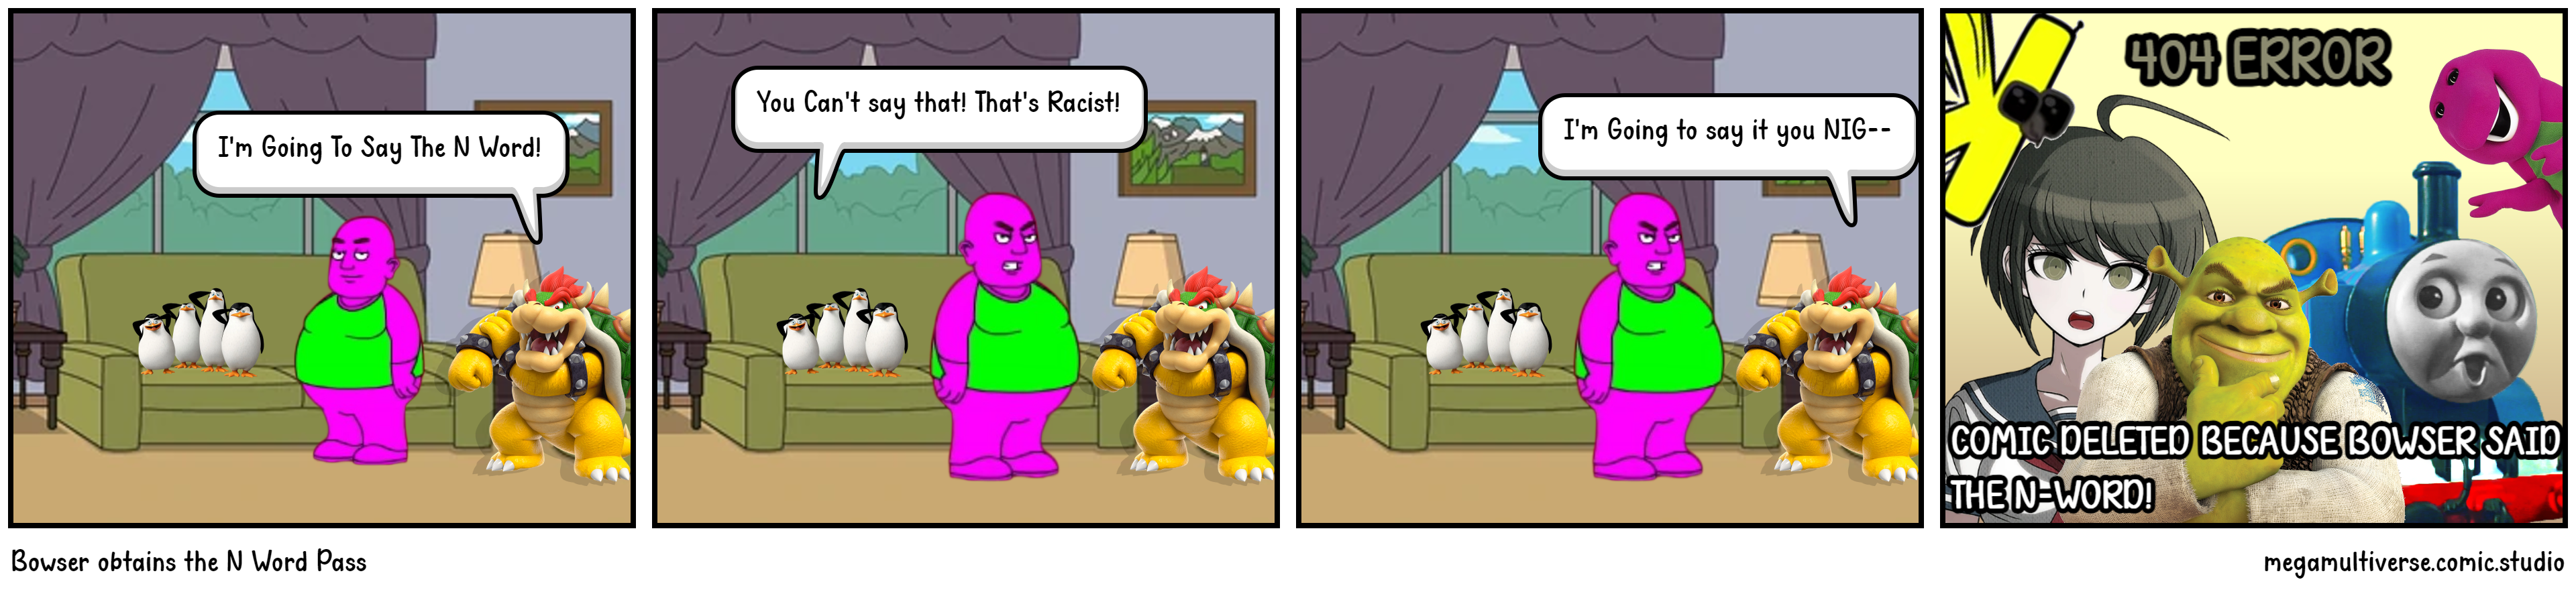 Bowser obtains the N Word Pass